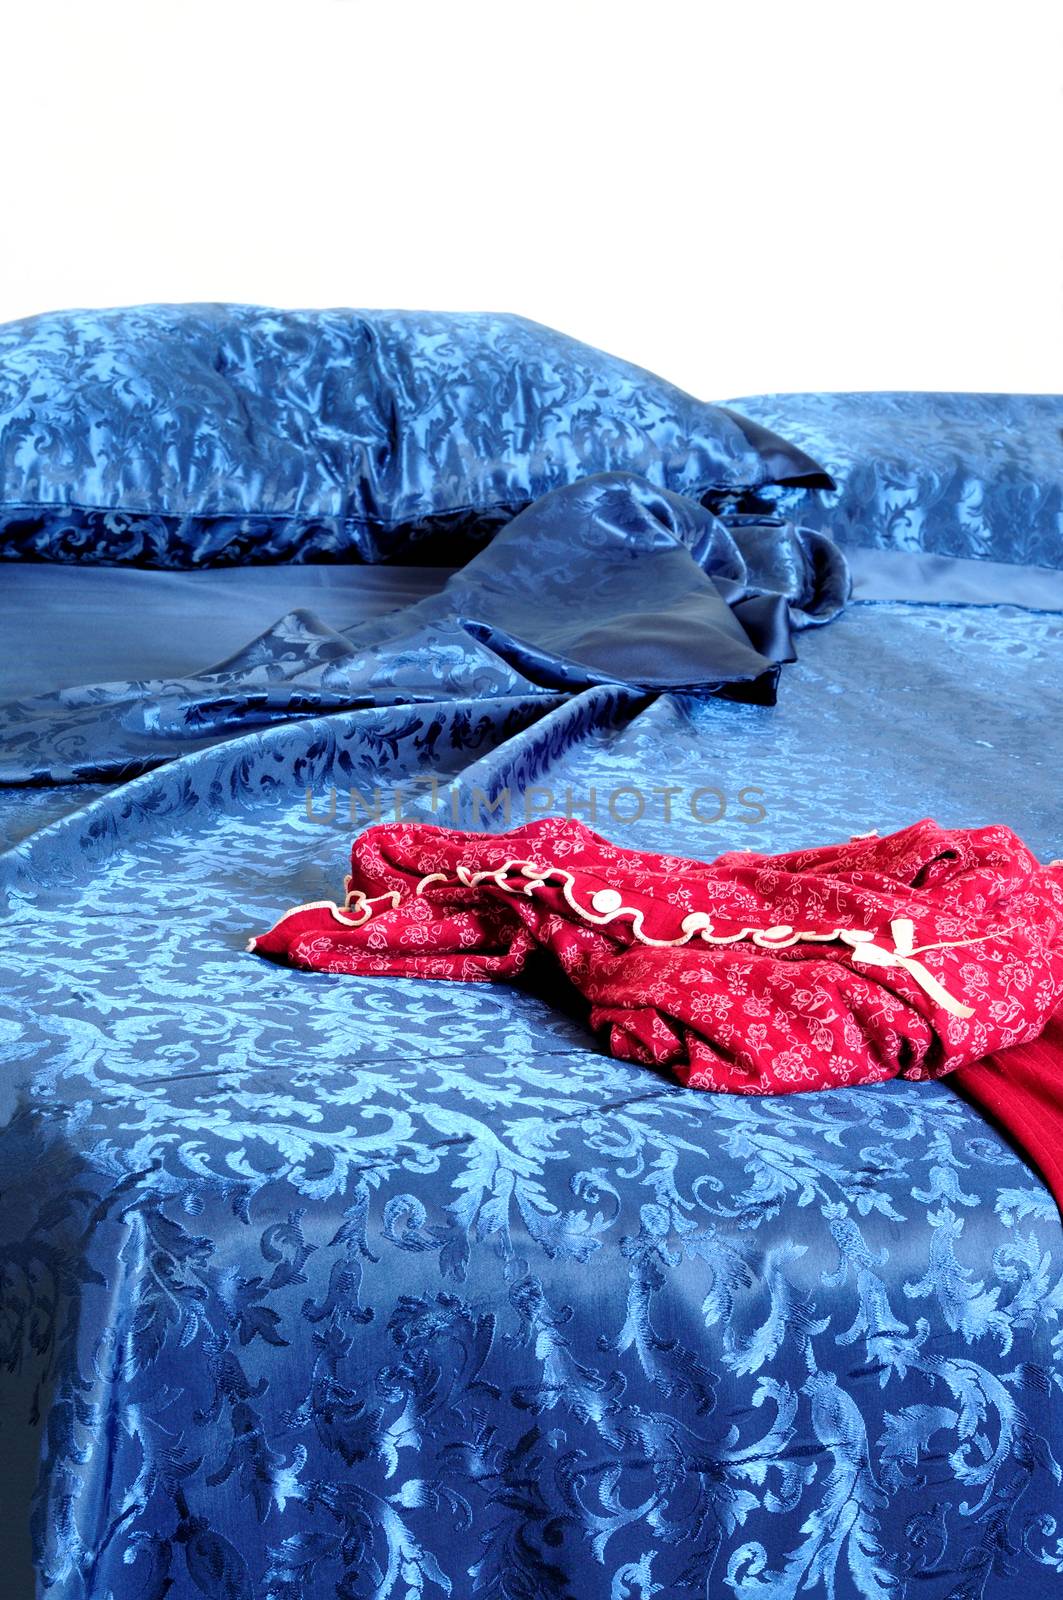 woman red pyjamas on messy bed,vertical